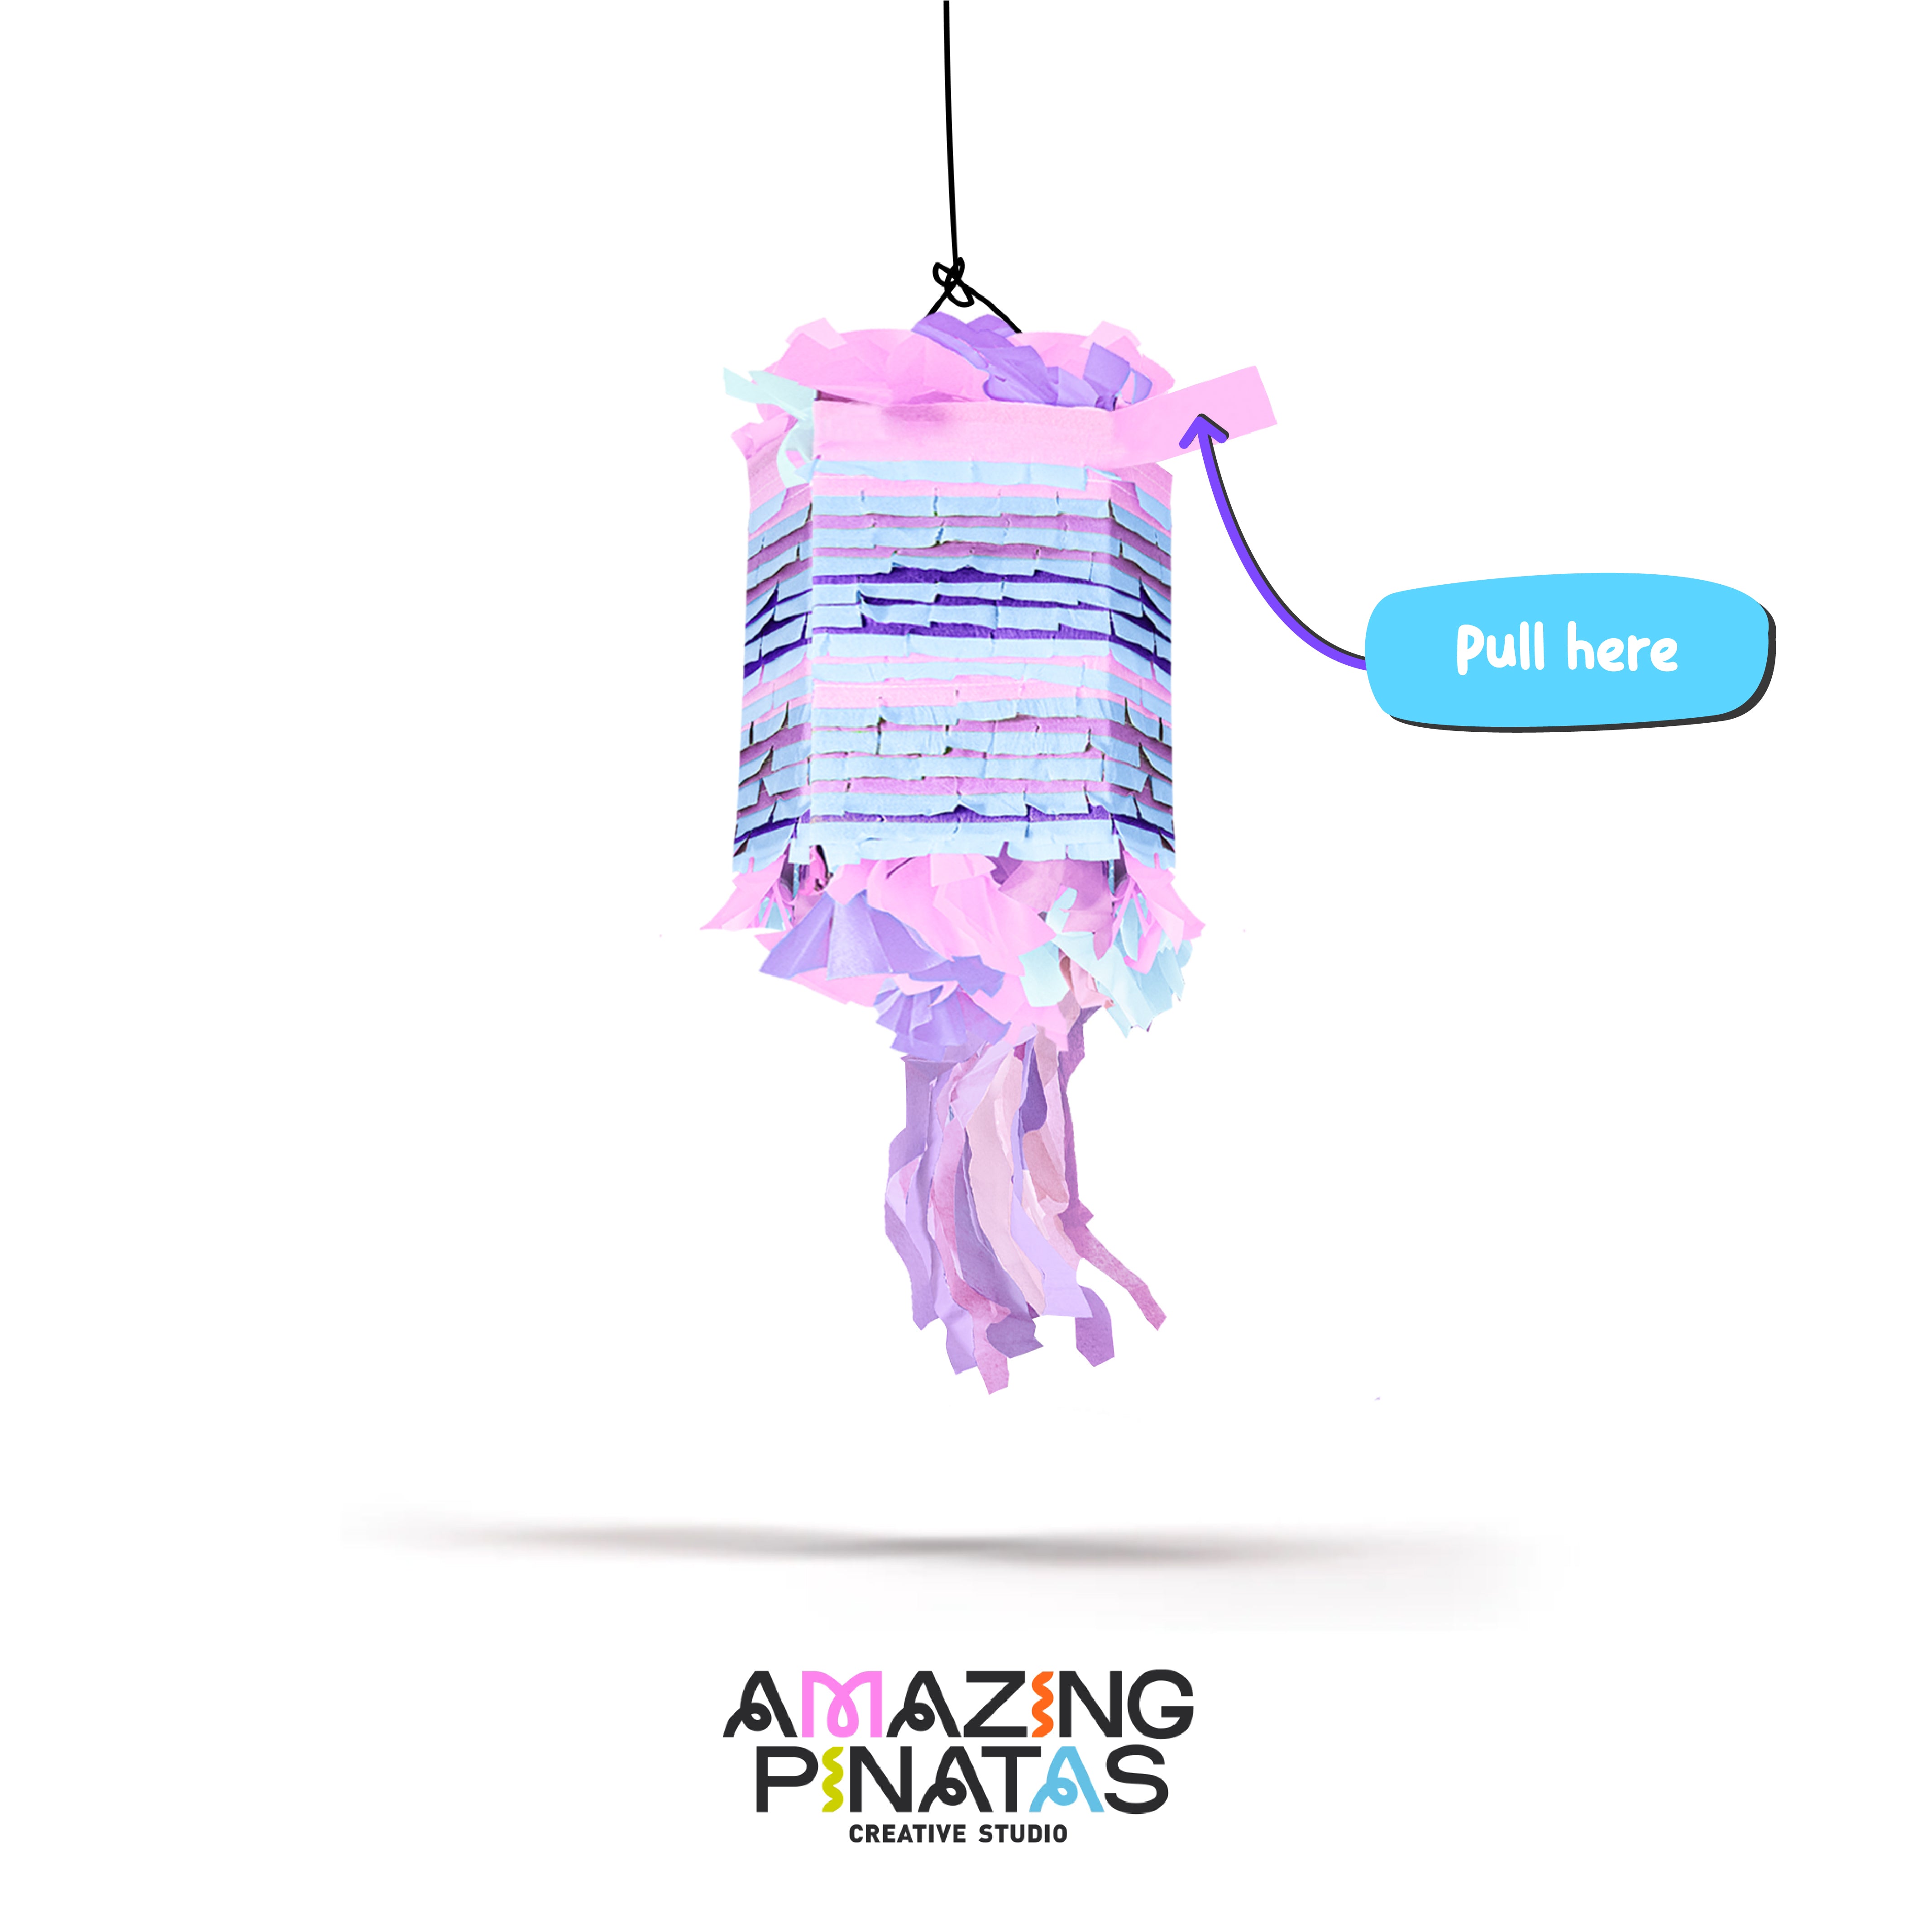 spinblast piñata hit free , fun, safe and eco friendly piñata. Perfect for Fantasy, Mermaid, Fairy, and Unicorn themed parties.